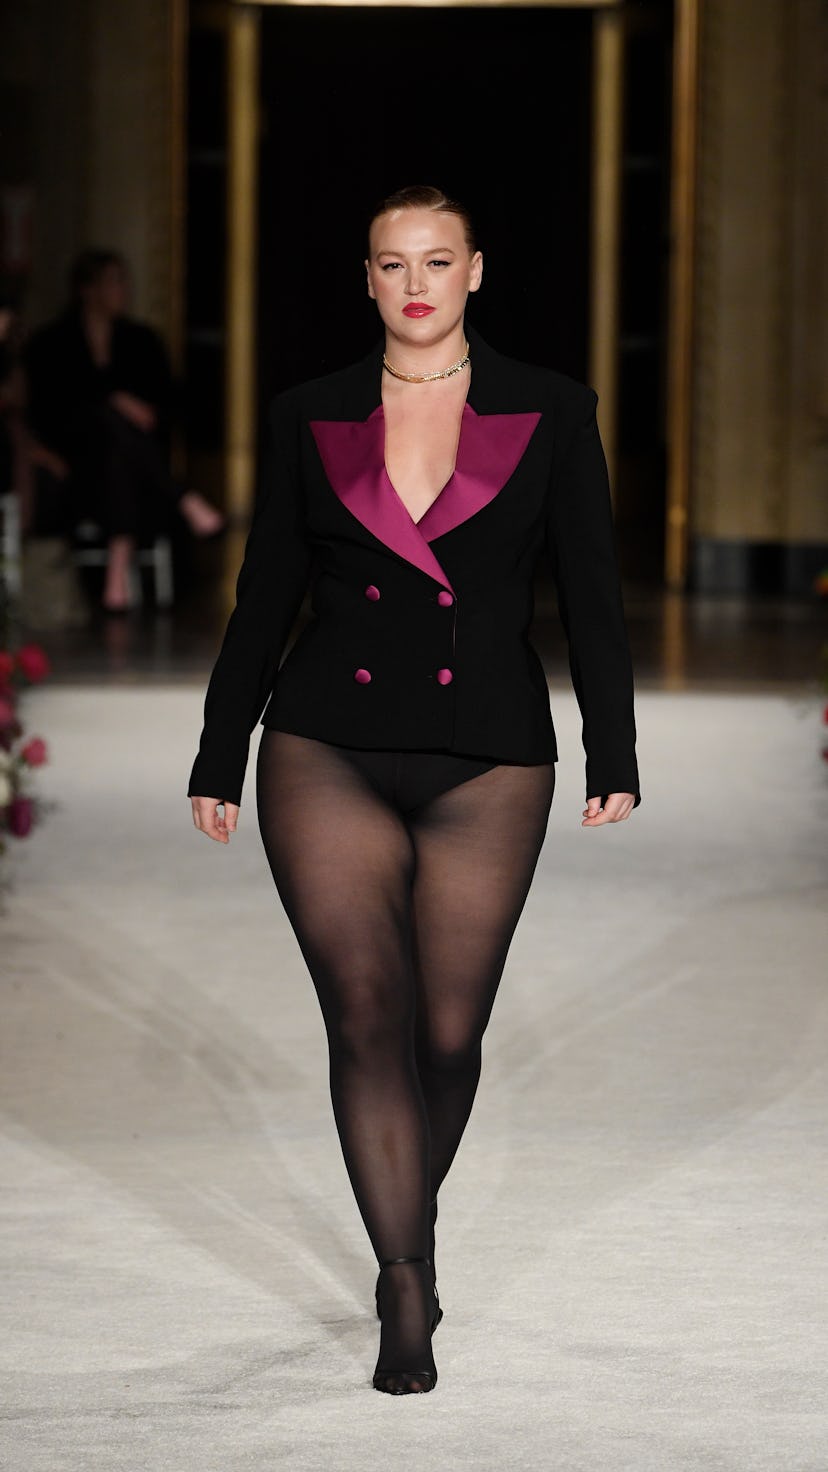 A plus-size model at Christian Siriano RTW Fall 2023.